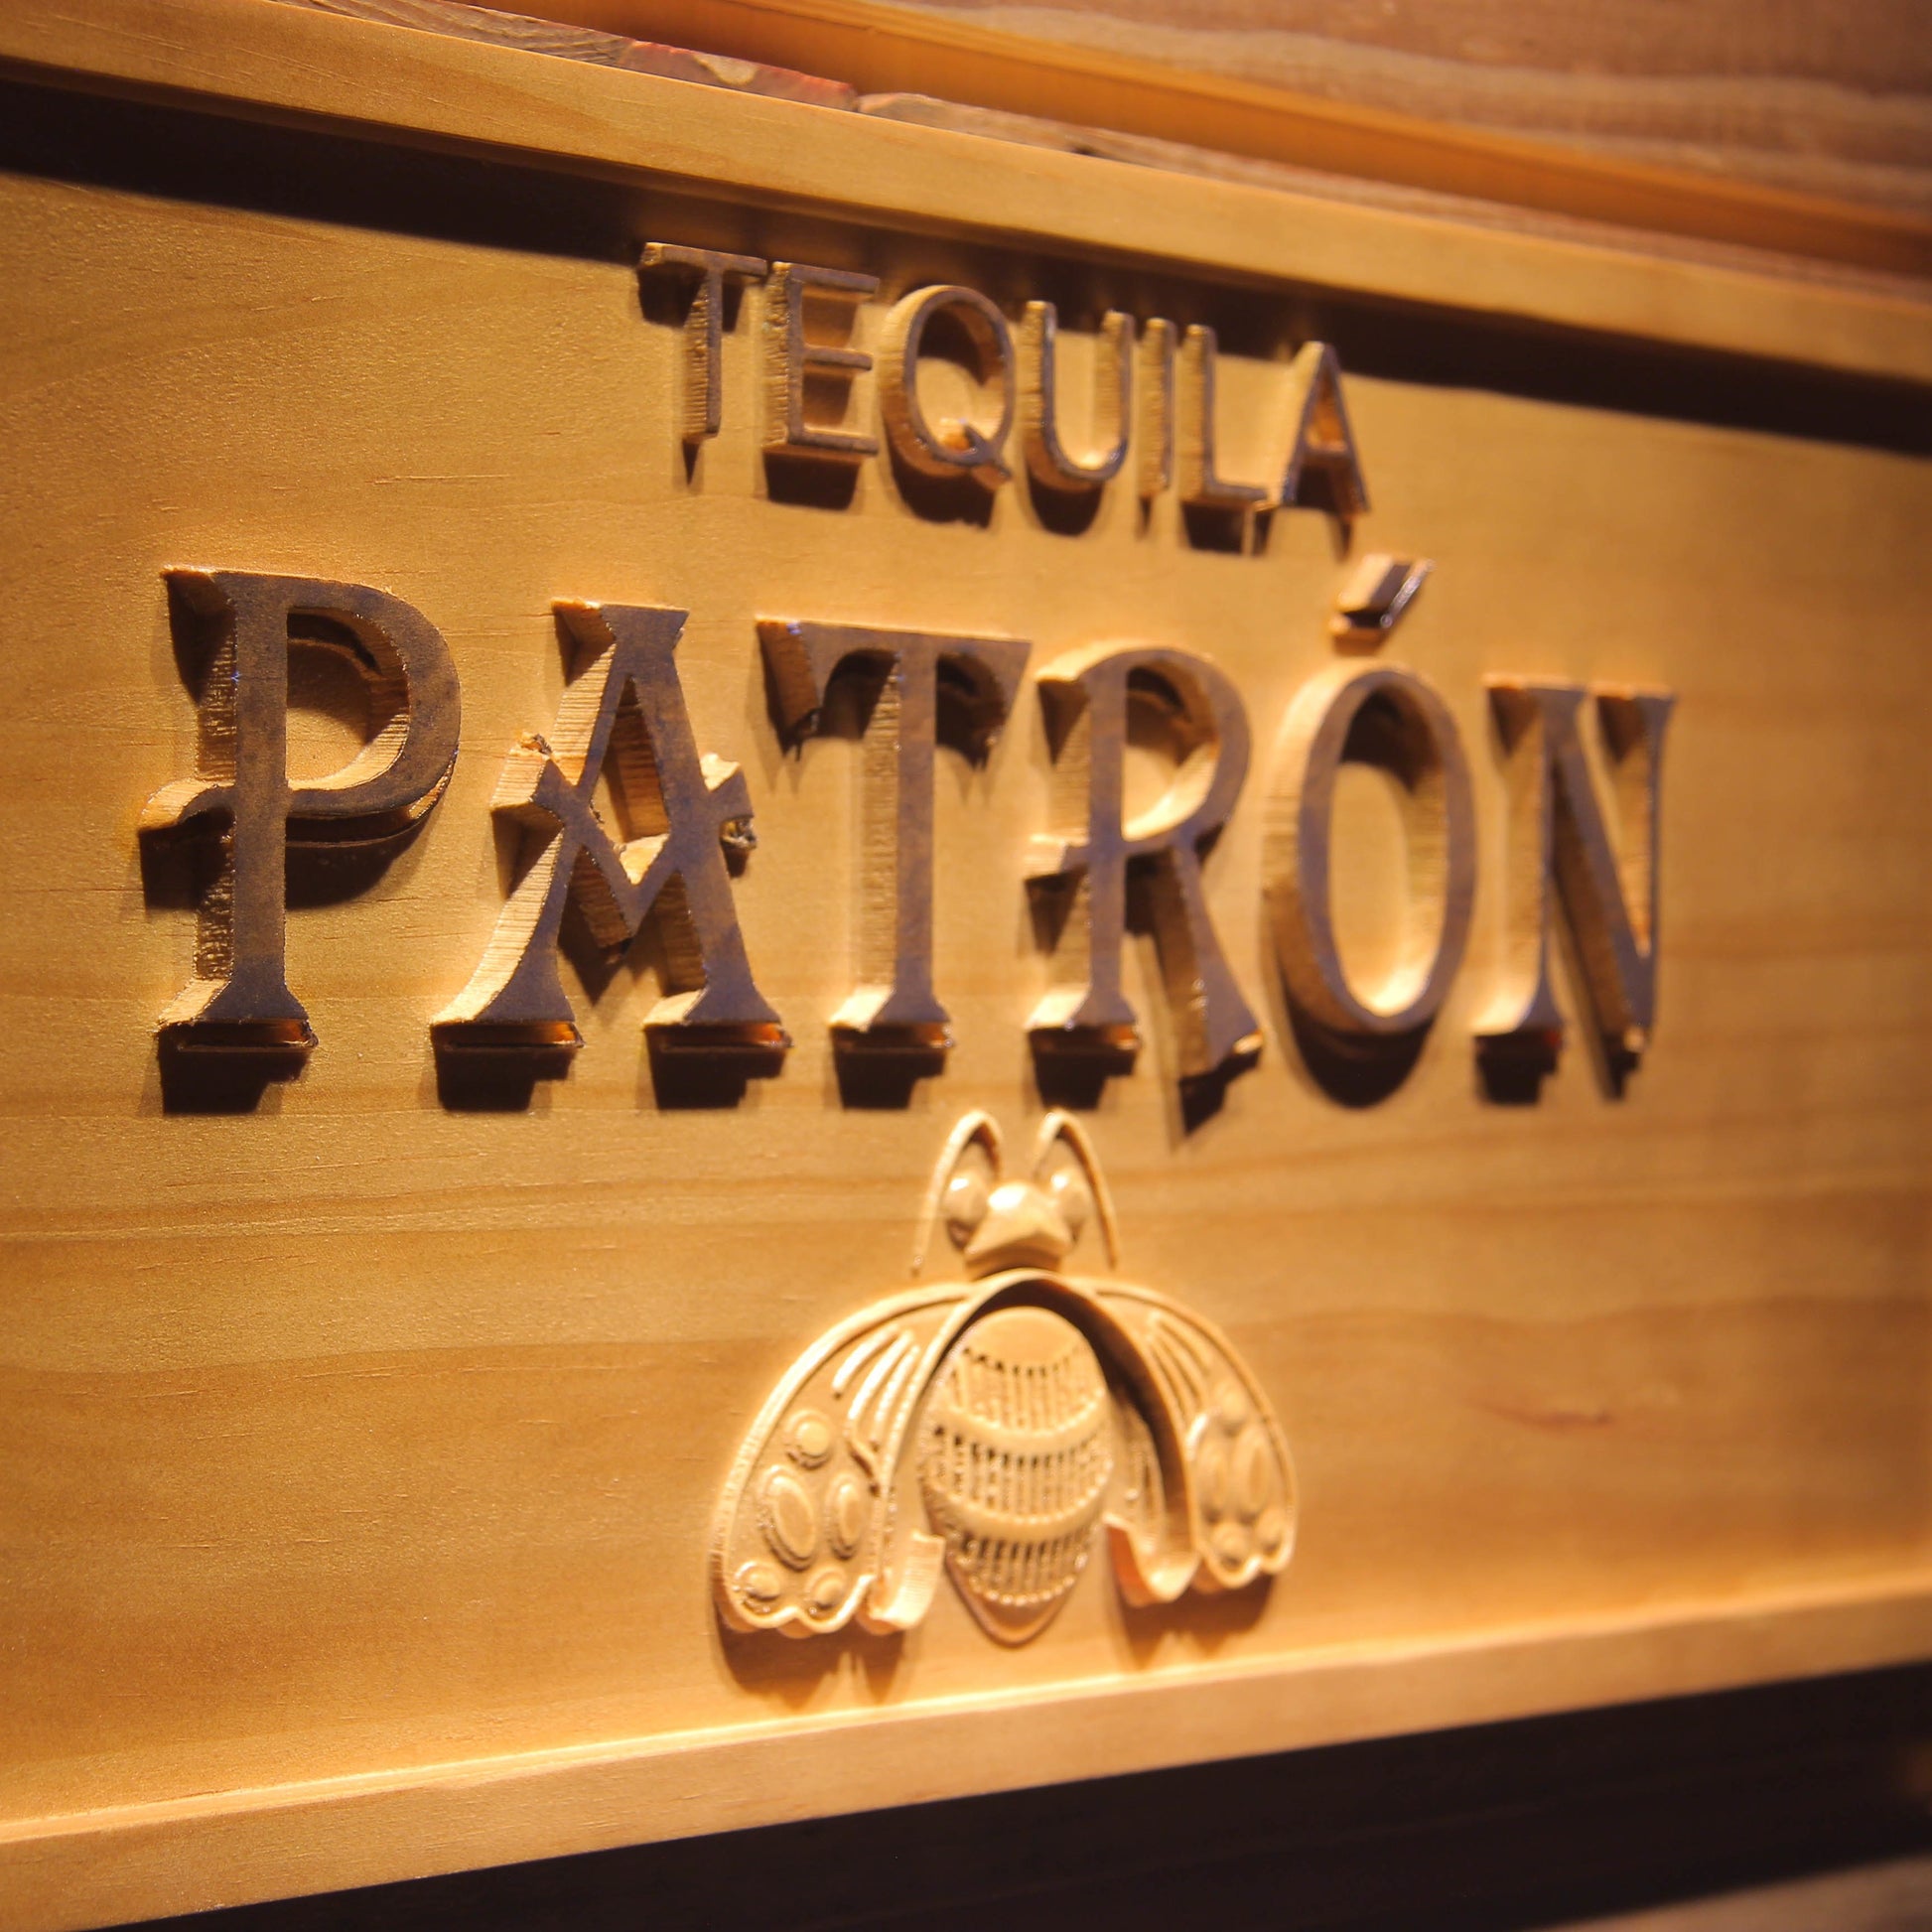 Tequila Patron Bar 3D Wooden Signs by Woody Signs Co. - Handmade Crafted Unique Wooden Creative